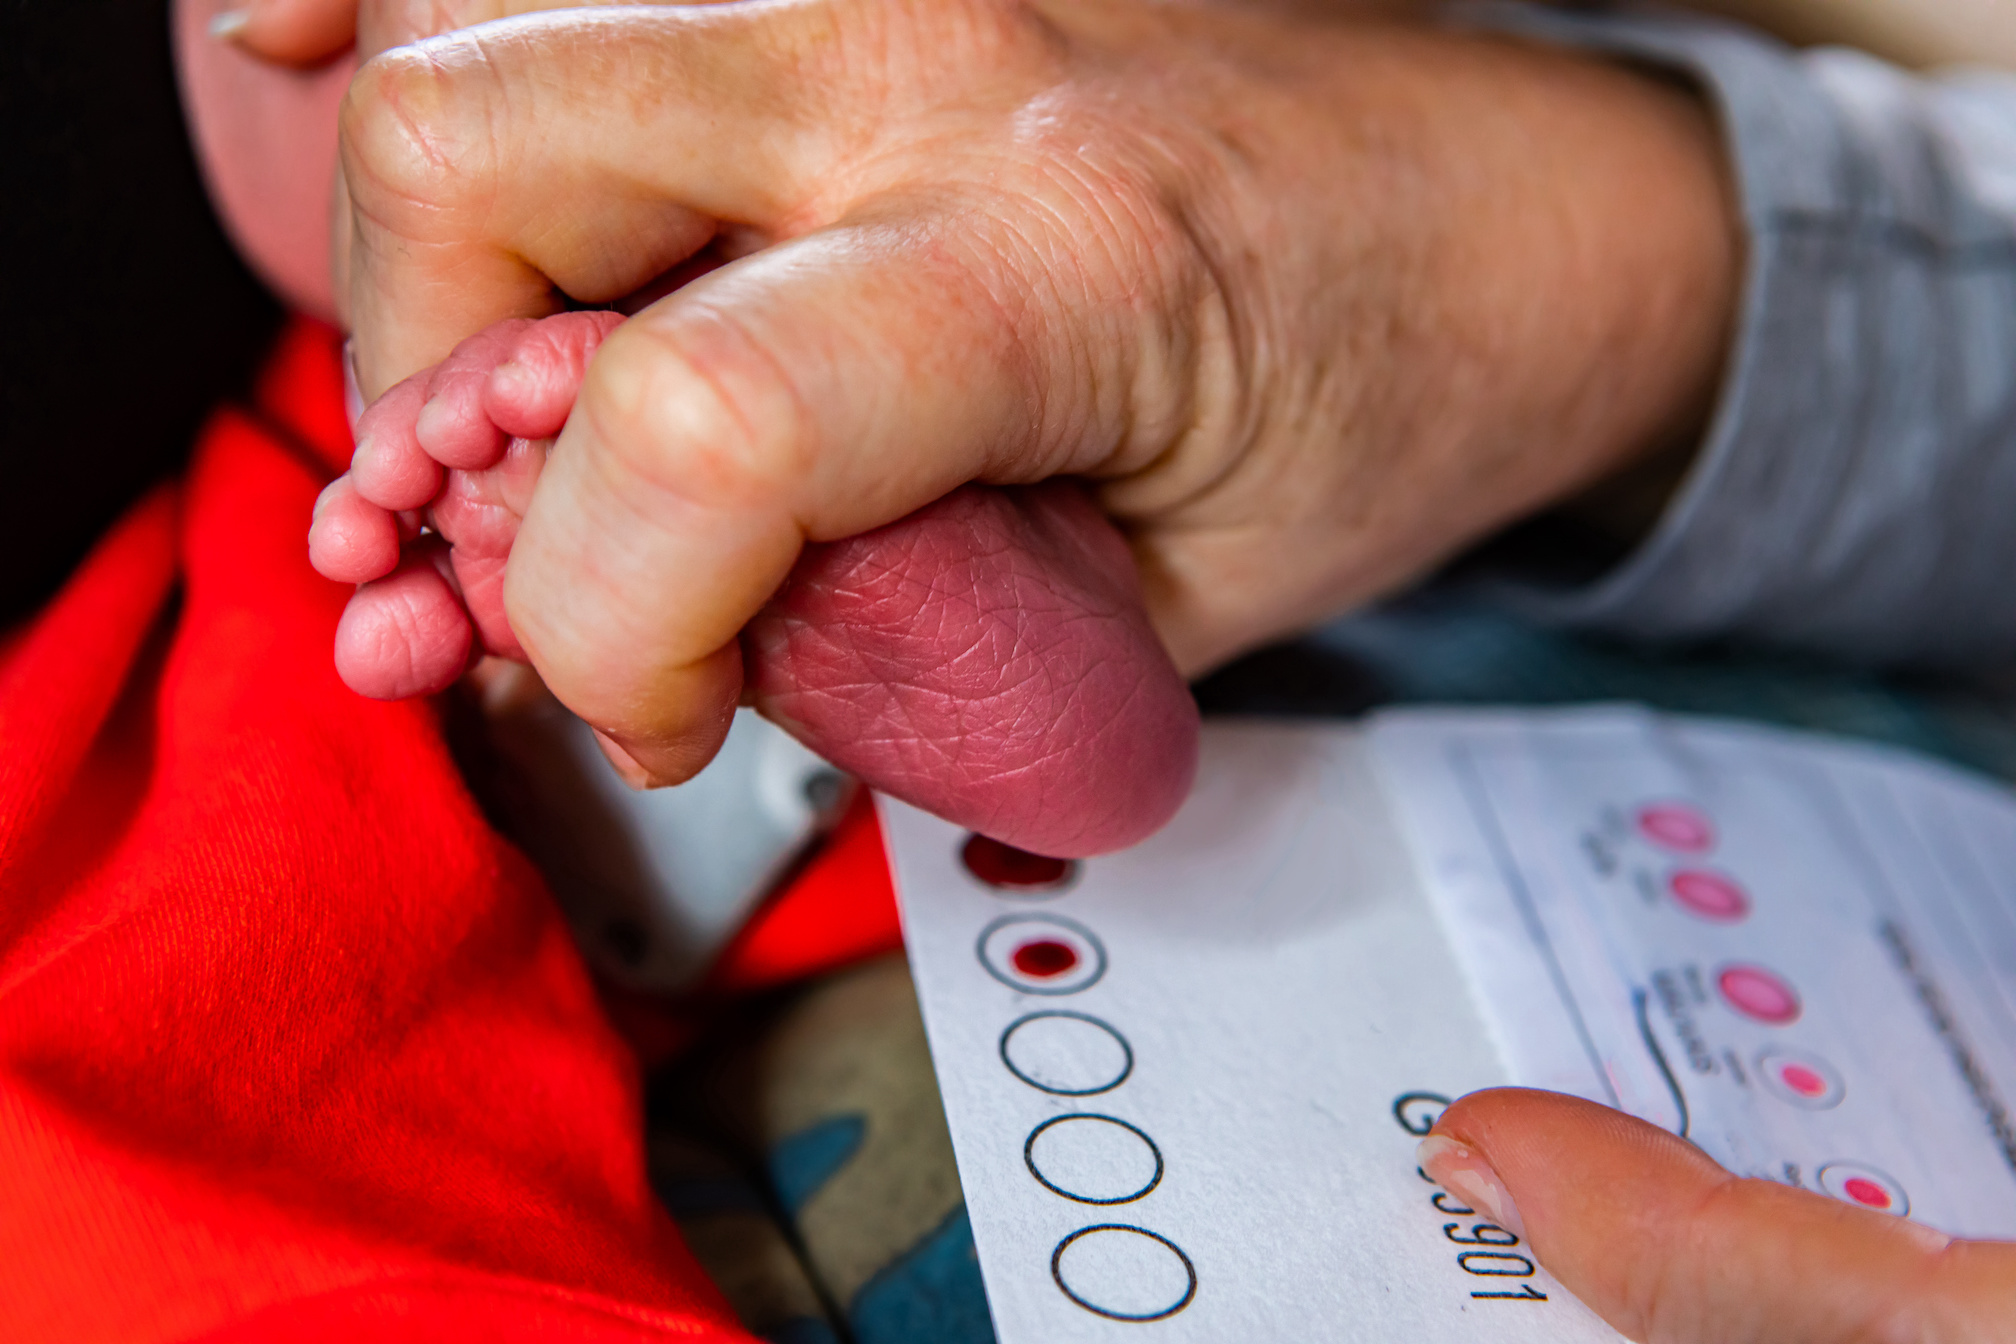 Close-up image of doctor performing a heel prick blood test for newborn screening